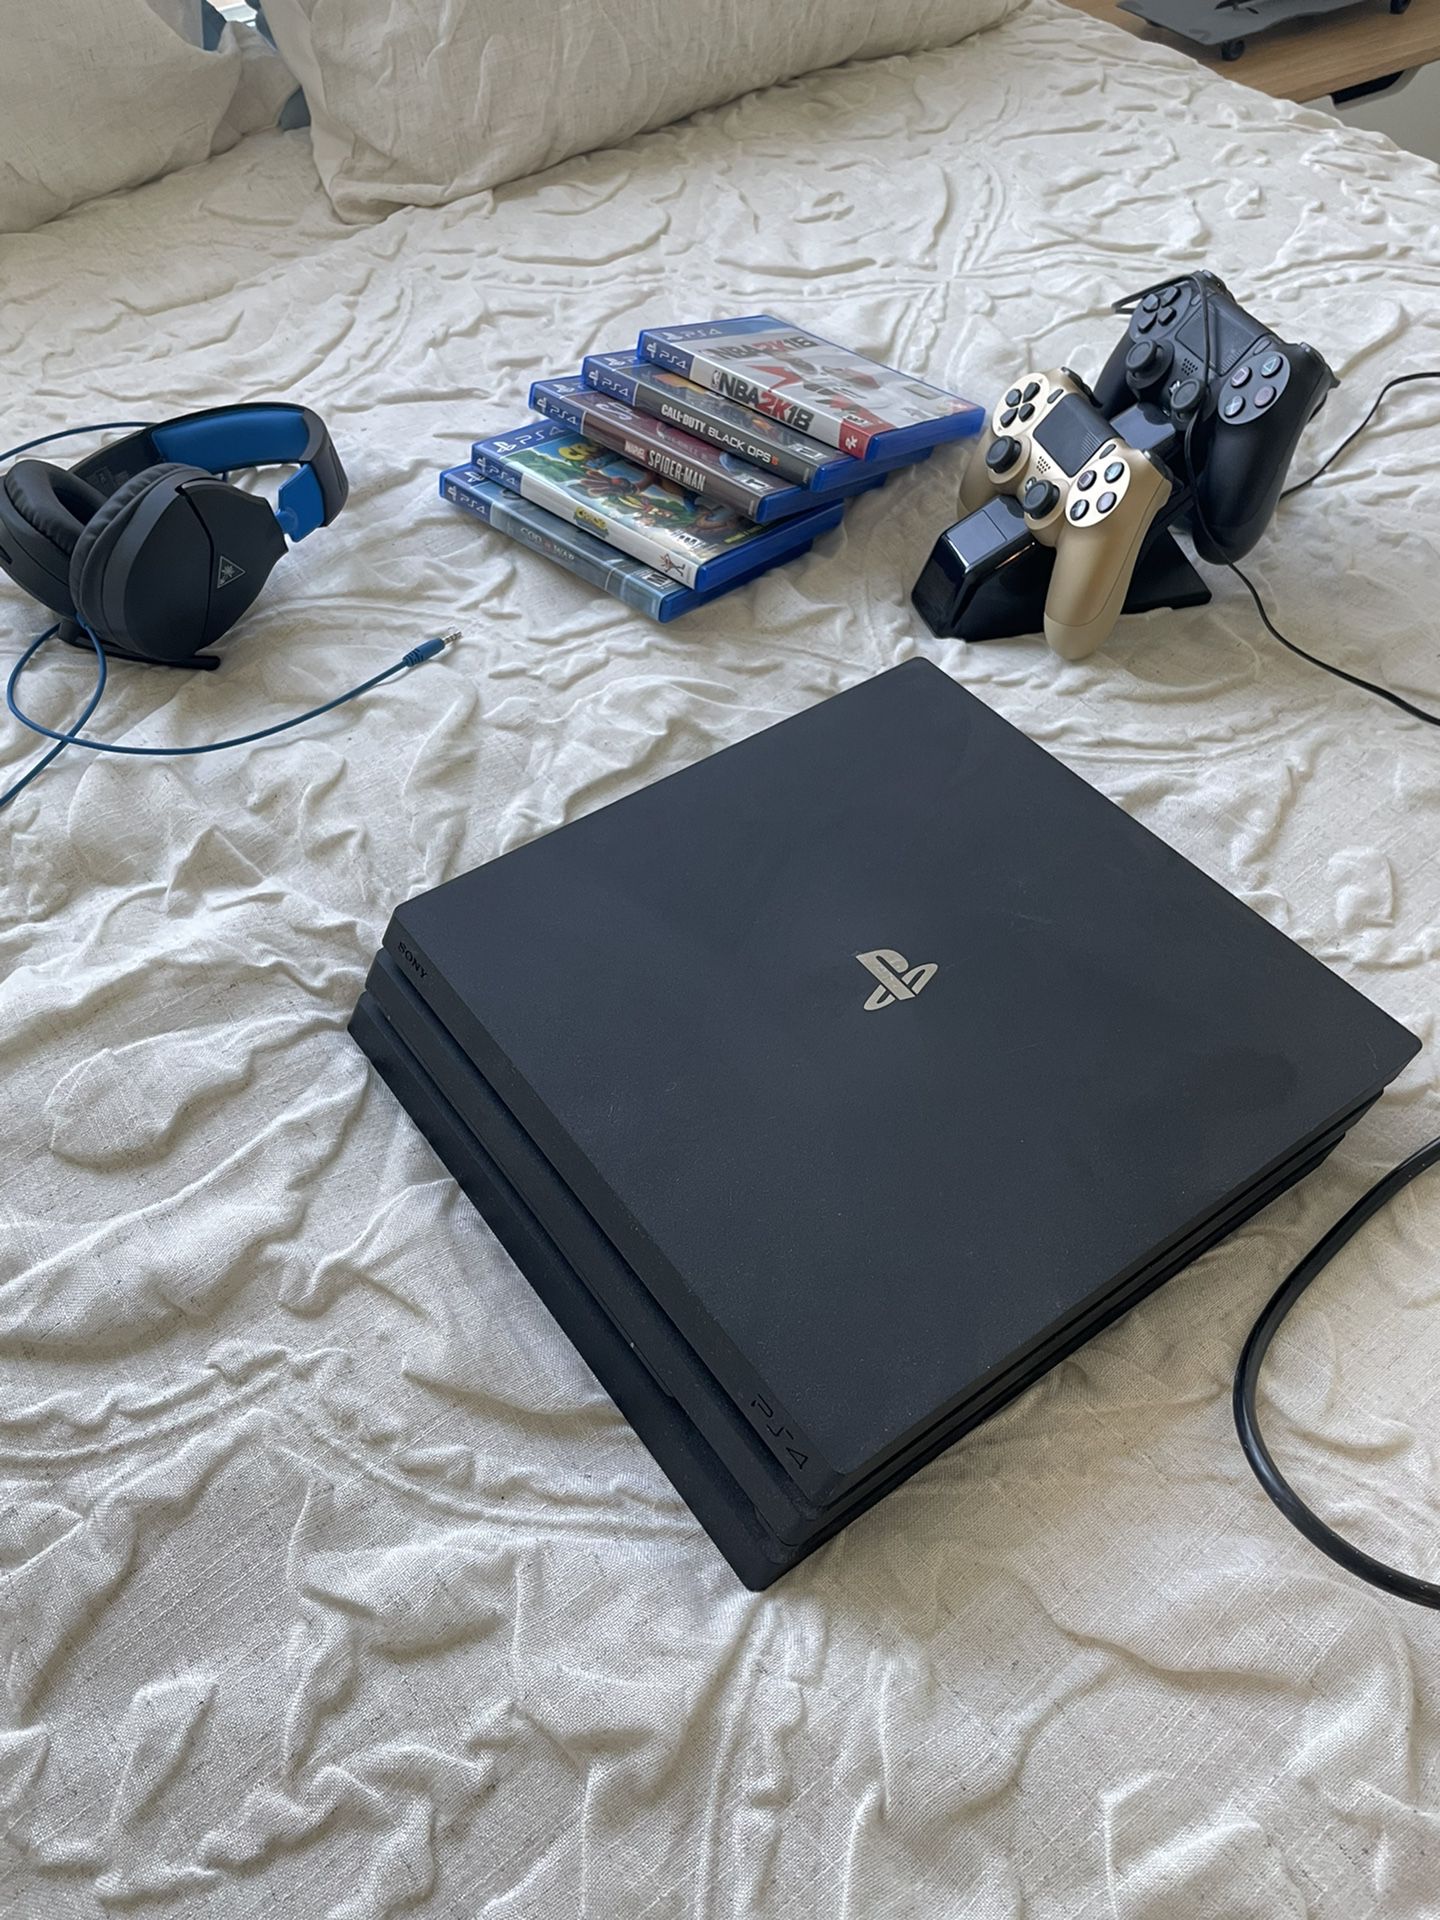 PS4 With 5 Games, 2 Controllers And Turtle Bay Headset